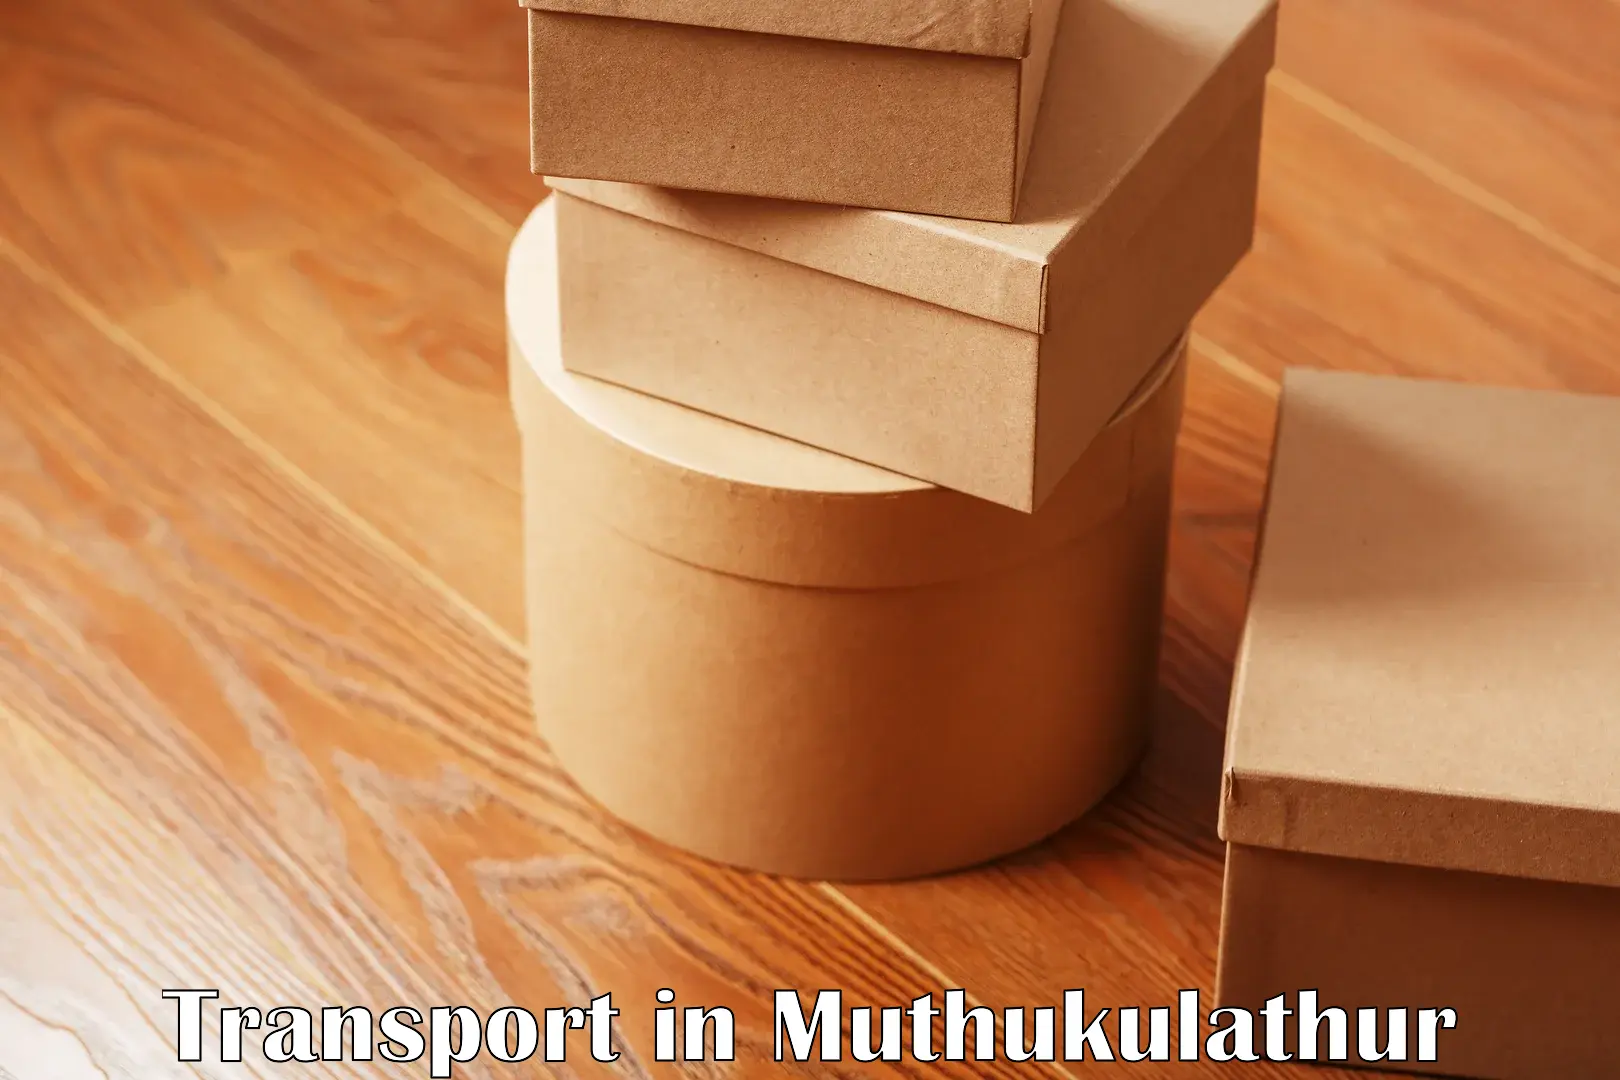 Commercial transport service in Muthukulathur